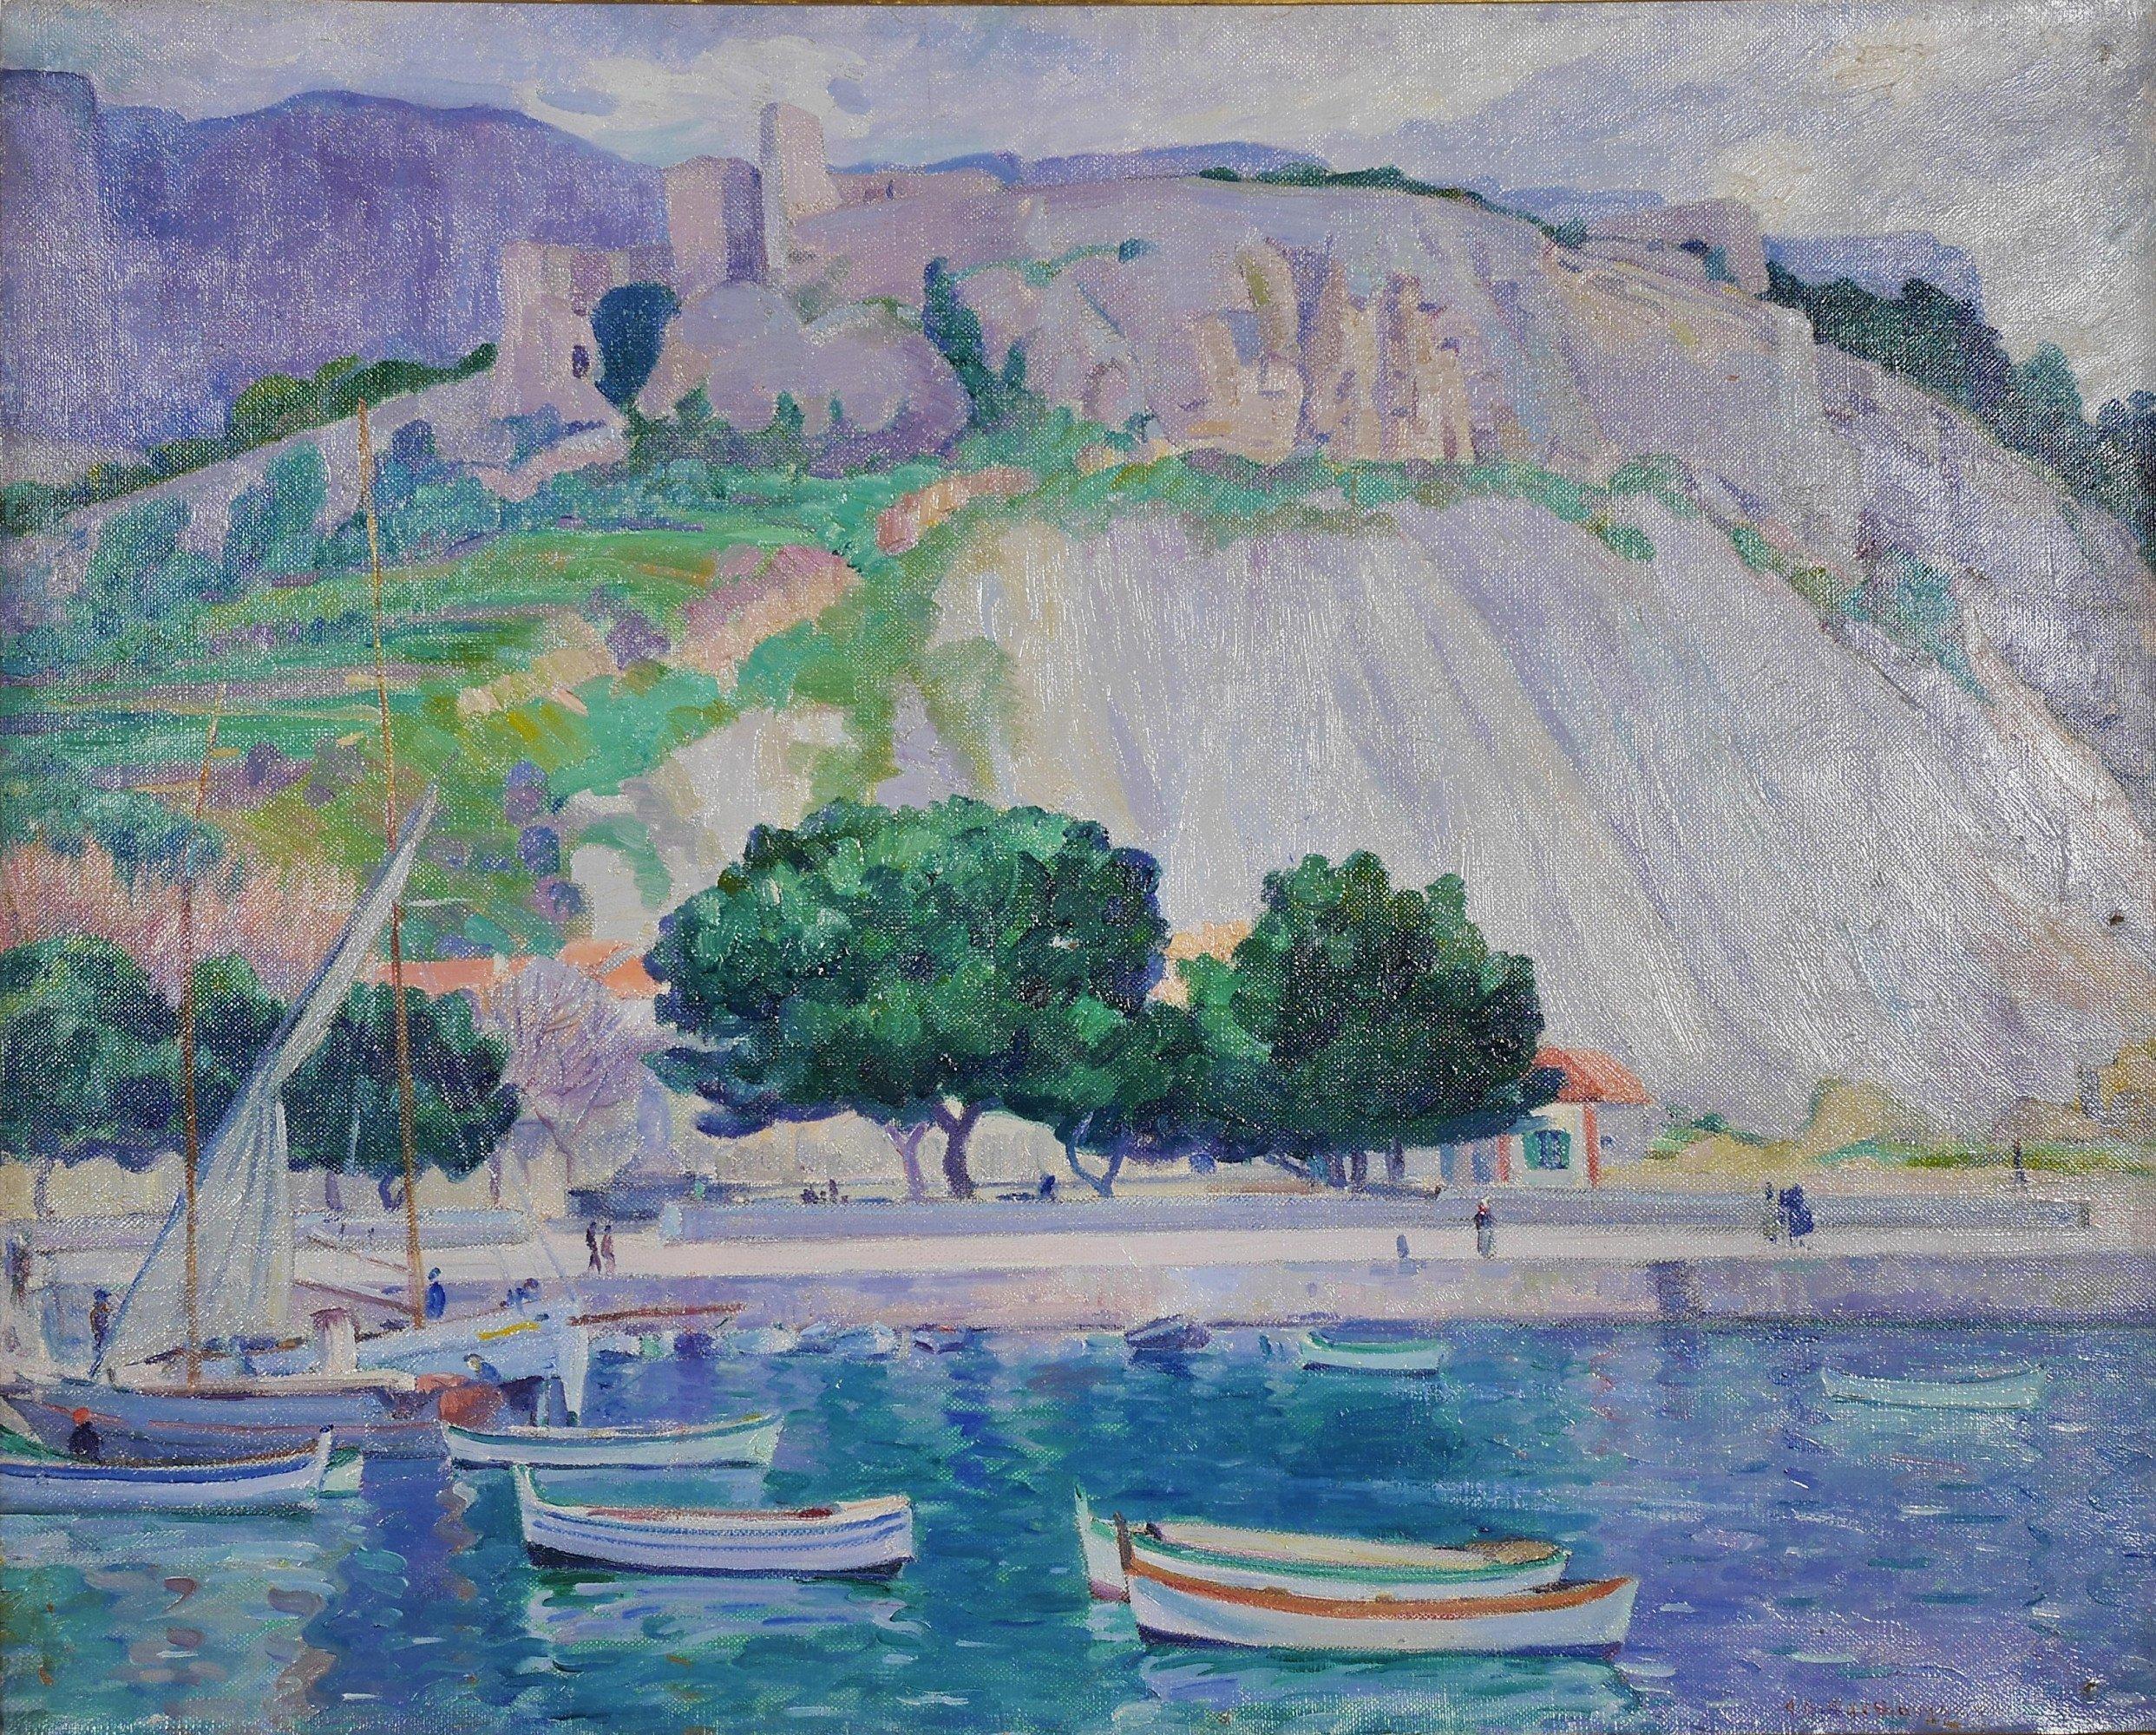 Cliff Rocks, Antibes, Early 20th Century French Seascape/Landscape - Painting by Abel Warshawsky